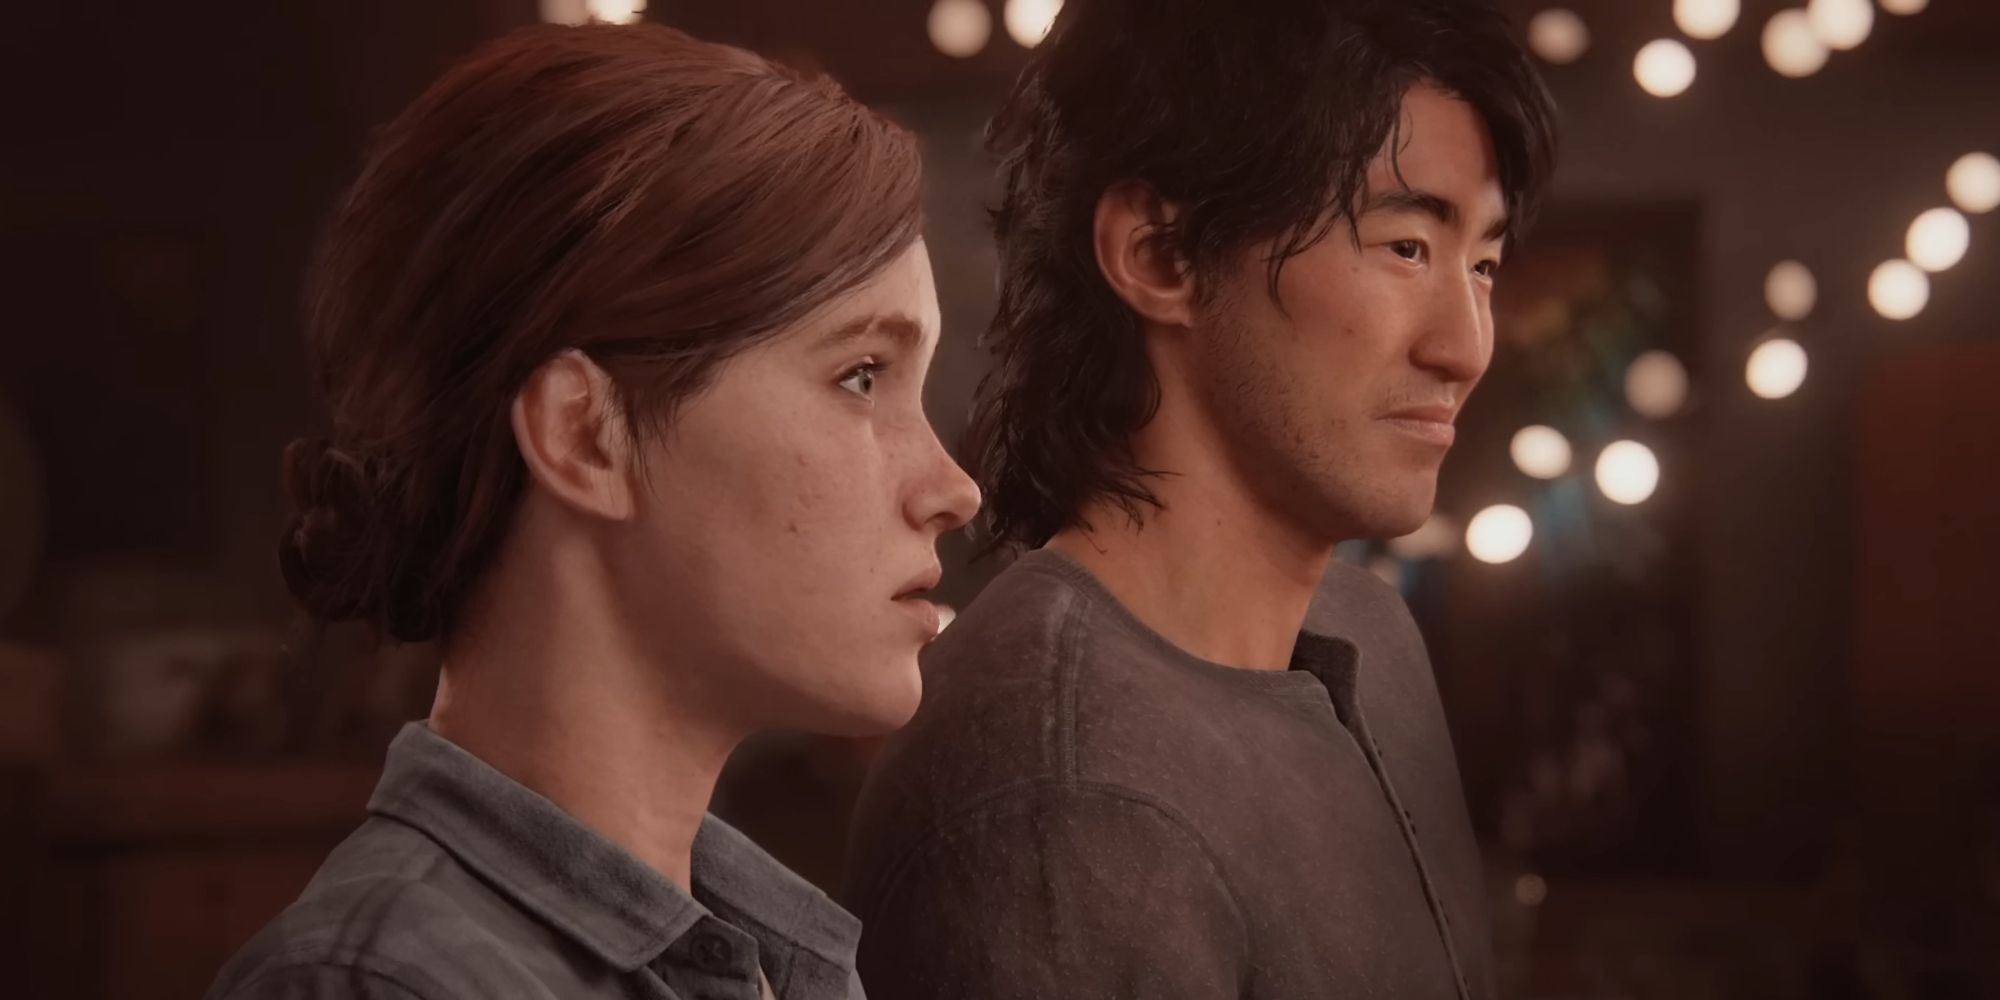 Ellie and Jesse standing side-by-side in The Last of Us Part 2.